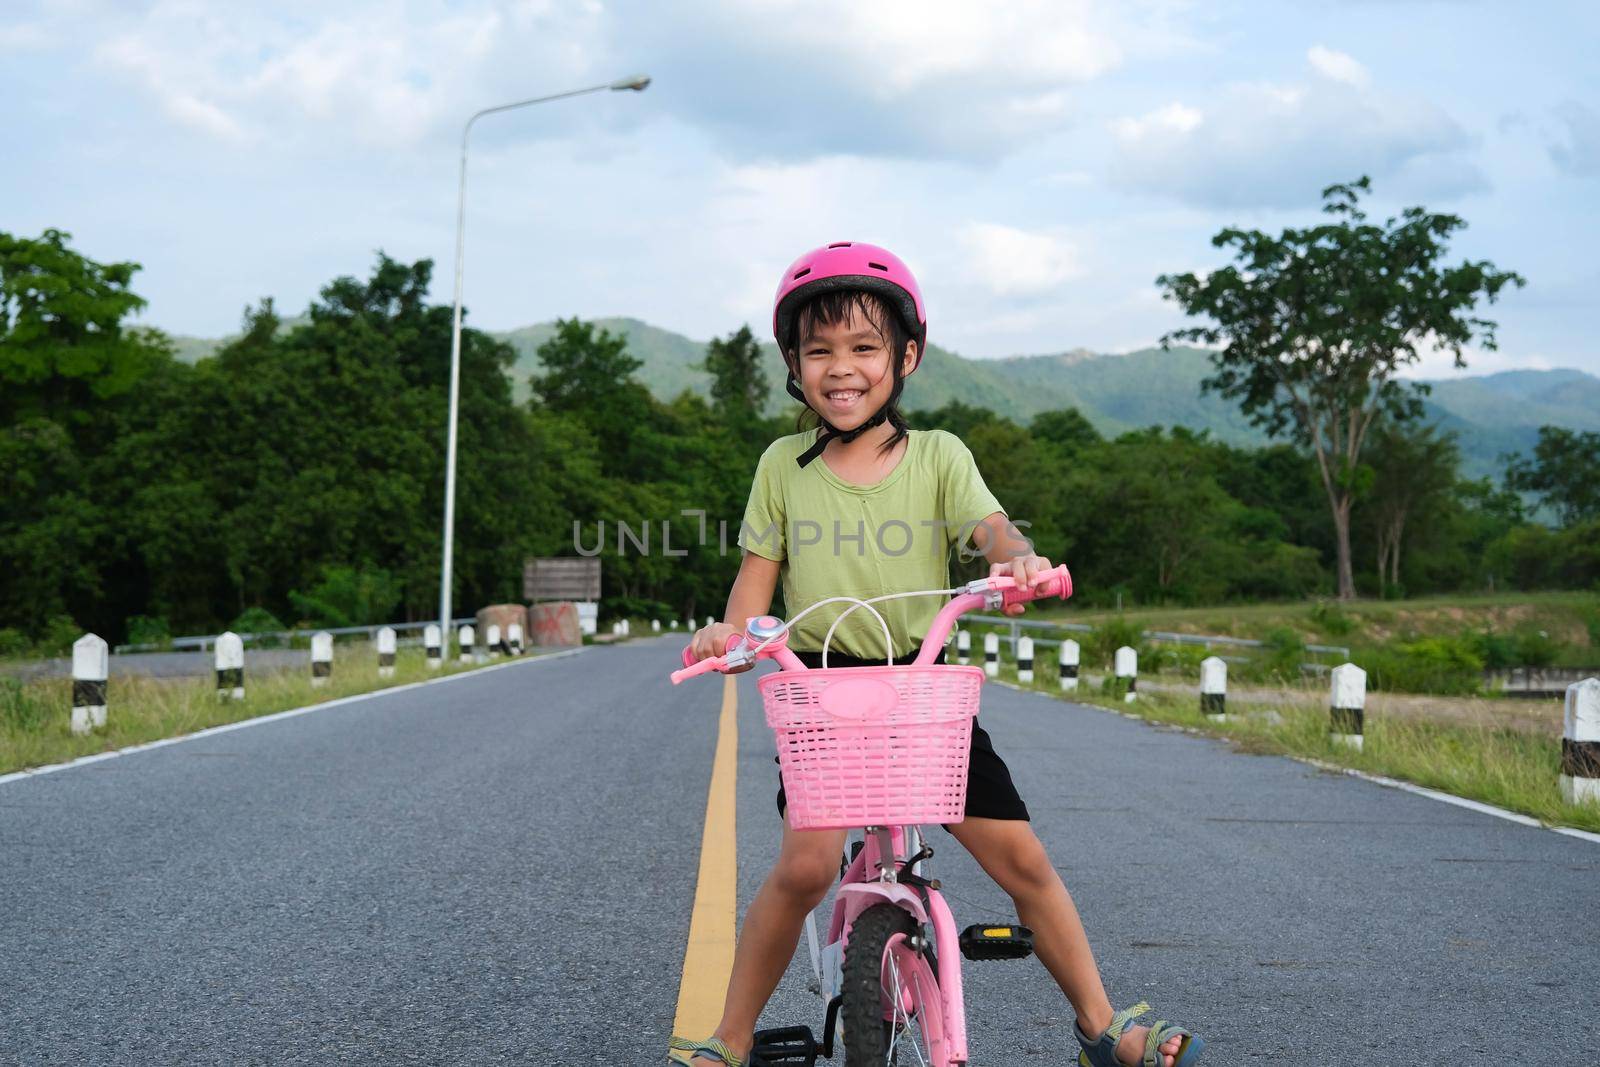 Cute little girl in a helmet riding a bicycle on an asphalt road in summer. Happy little girl riding a bicycle outdoors. Healthy Summer Activities for Kids